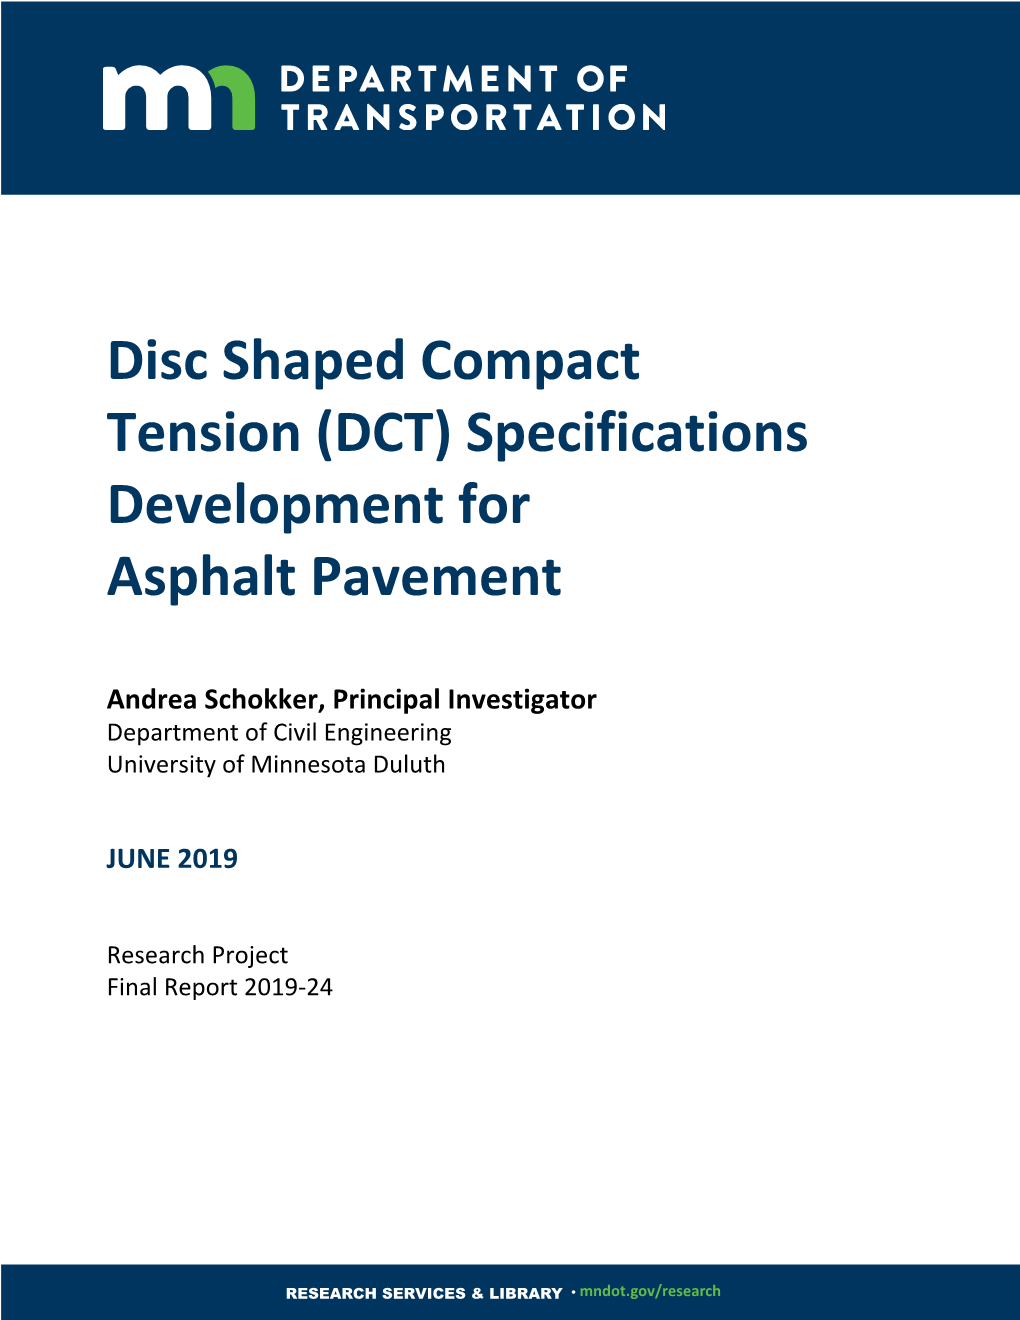 Disc Shaped Compact Tension (DCT) Specifications Development for Asphalt Pavement